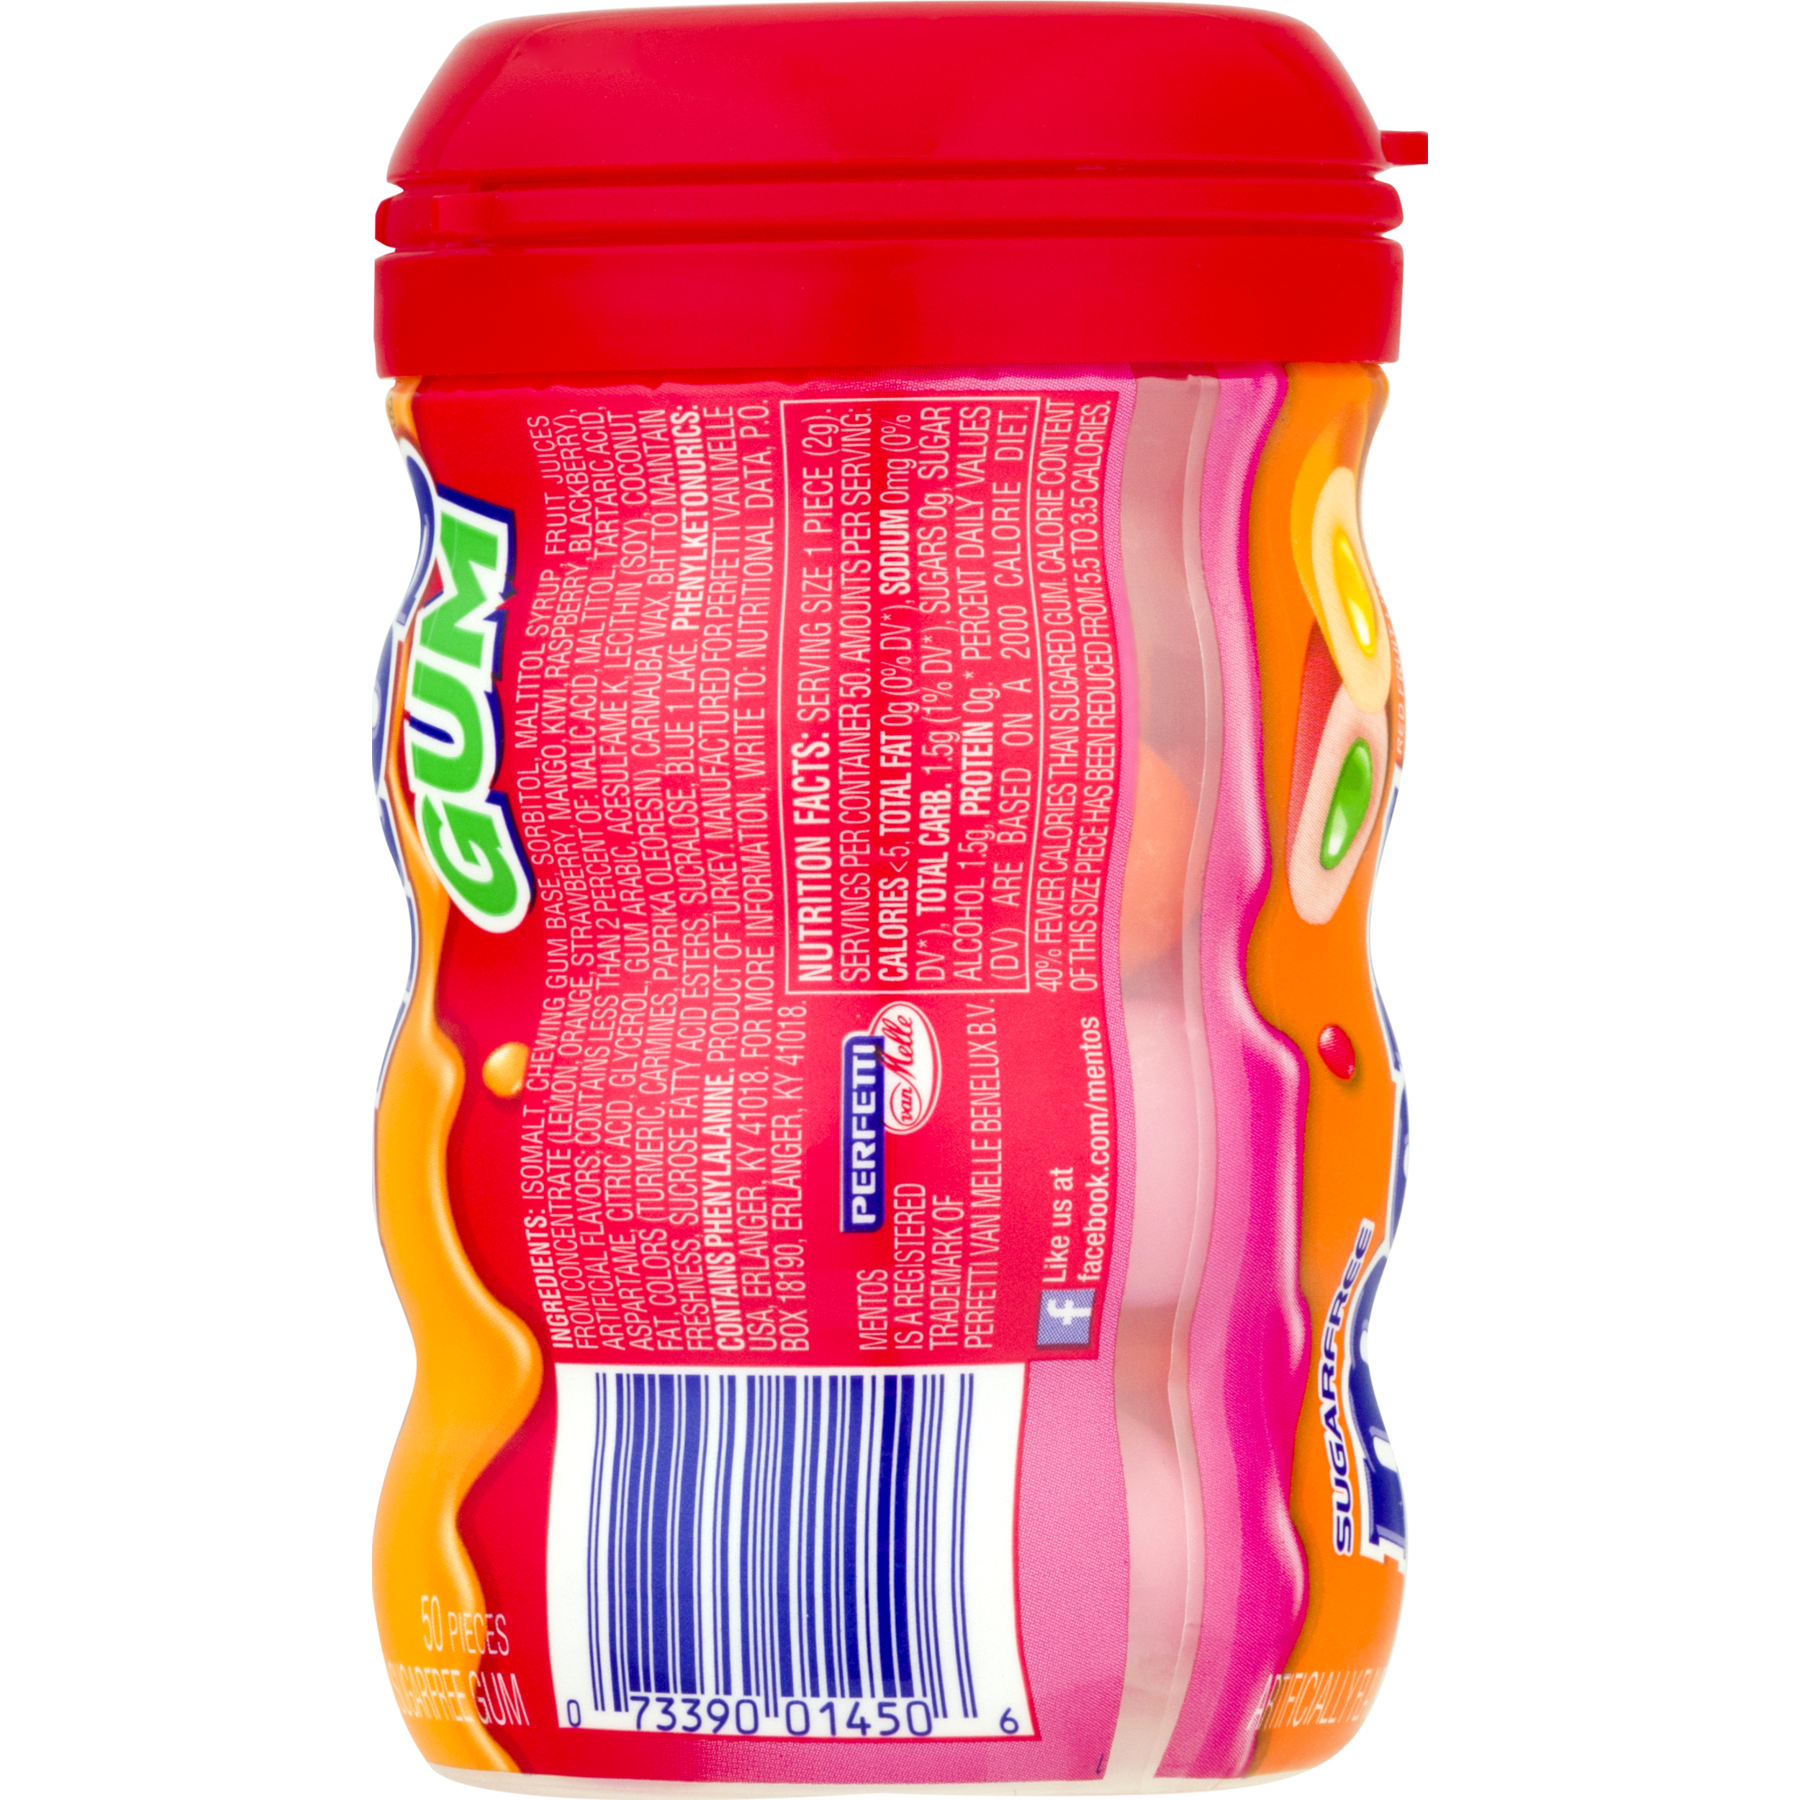 Mentos Gum Sugar-Free Tropical Red Fruit Lime Chewing Gum, 50 Regular Size Pieces, Bottle - image 6 of 9